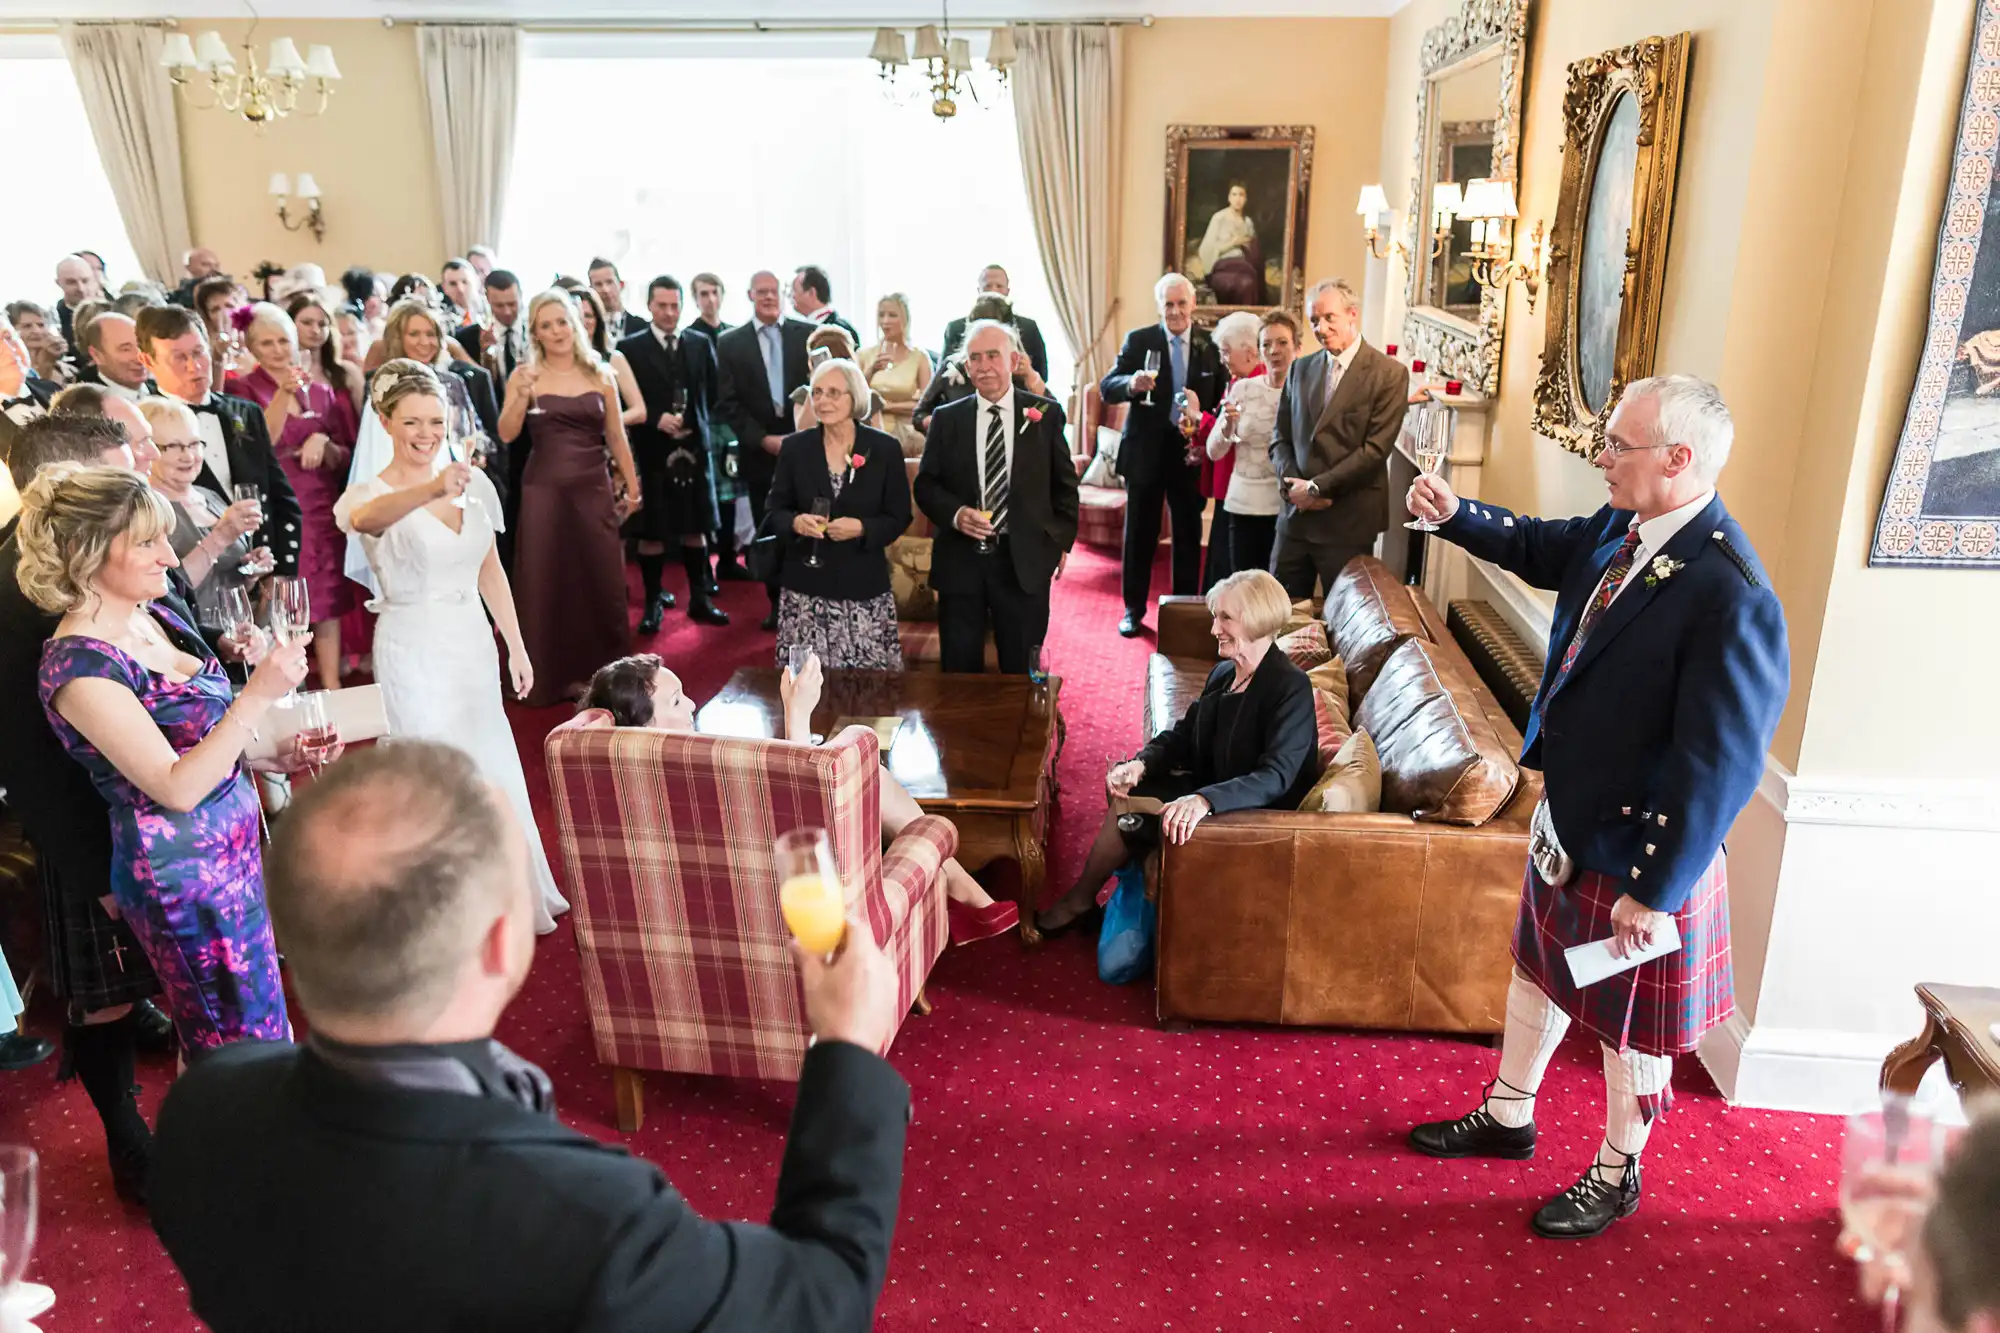 A wedding reception in an elegant room with guests watching a man in a kilt giving a speech.